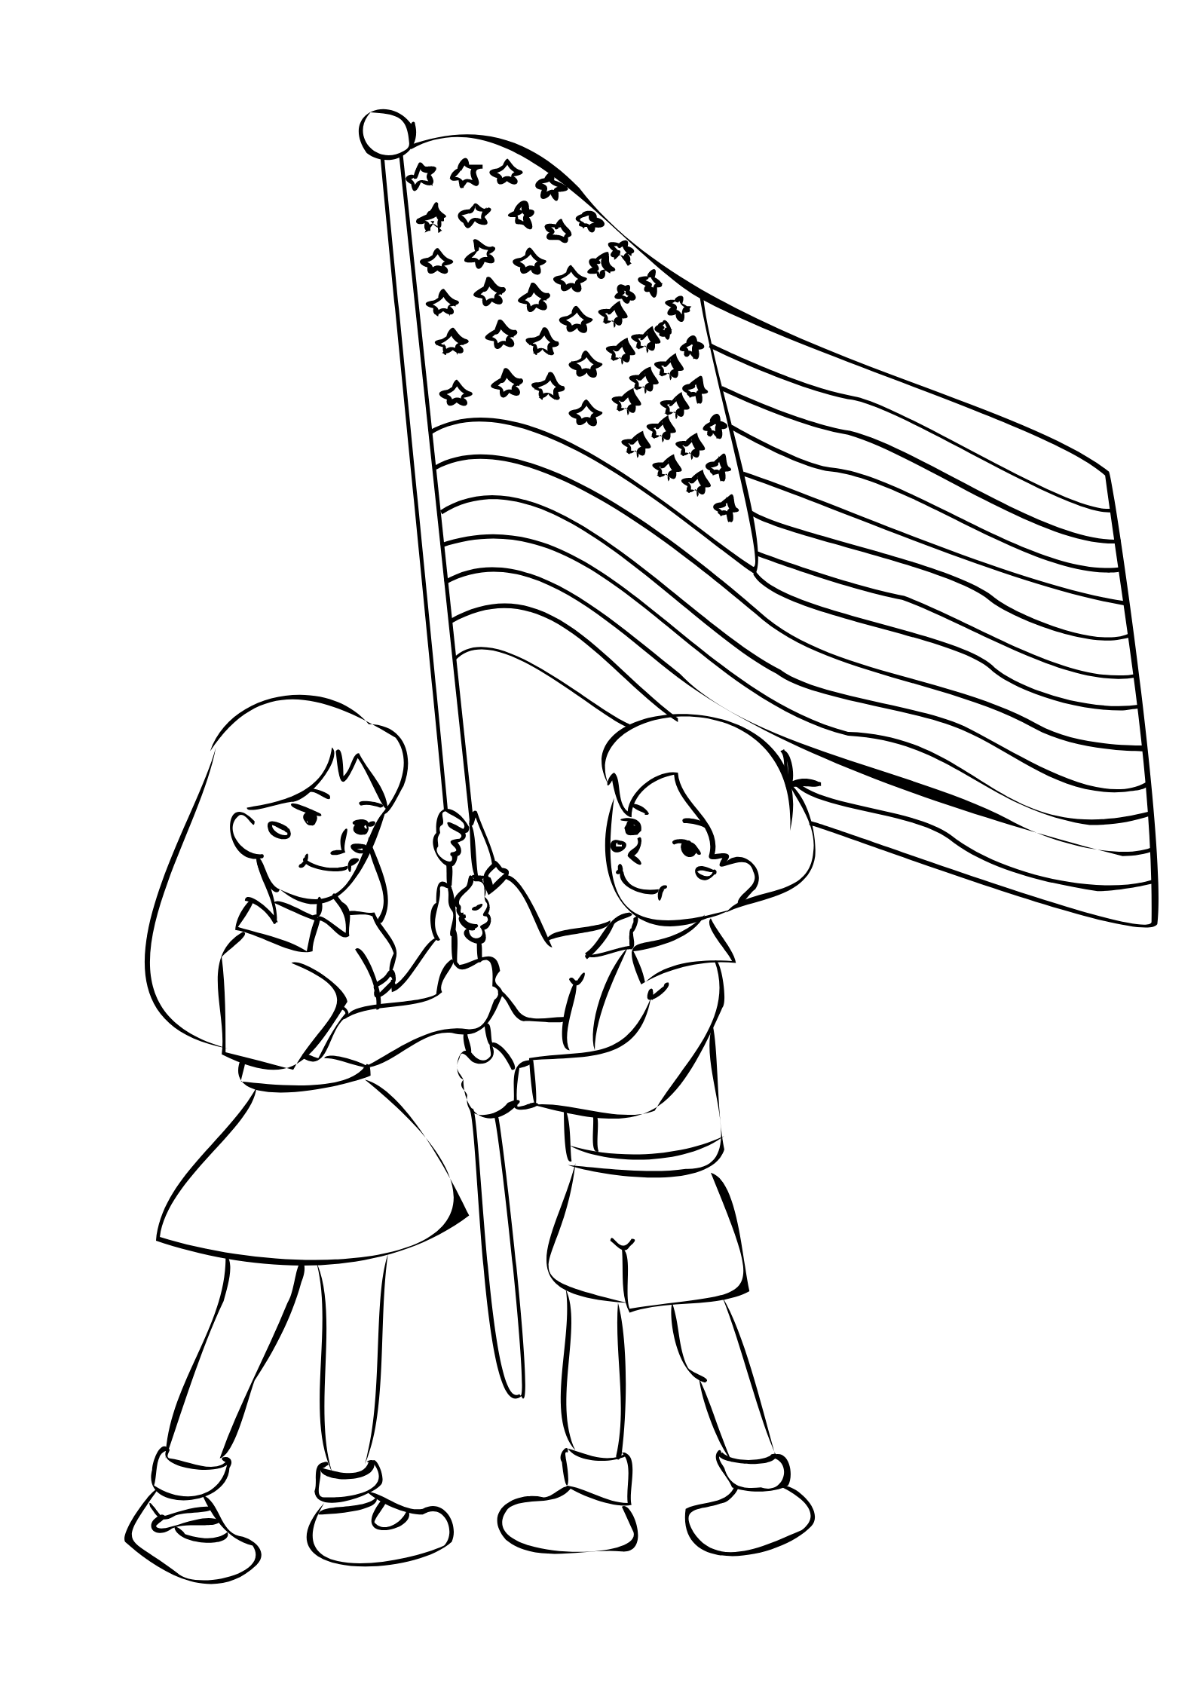 Patriots' Day Cartoon Drawing Template